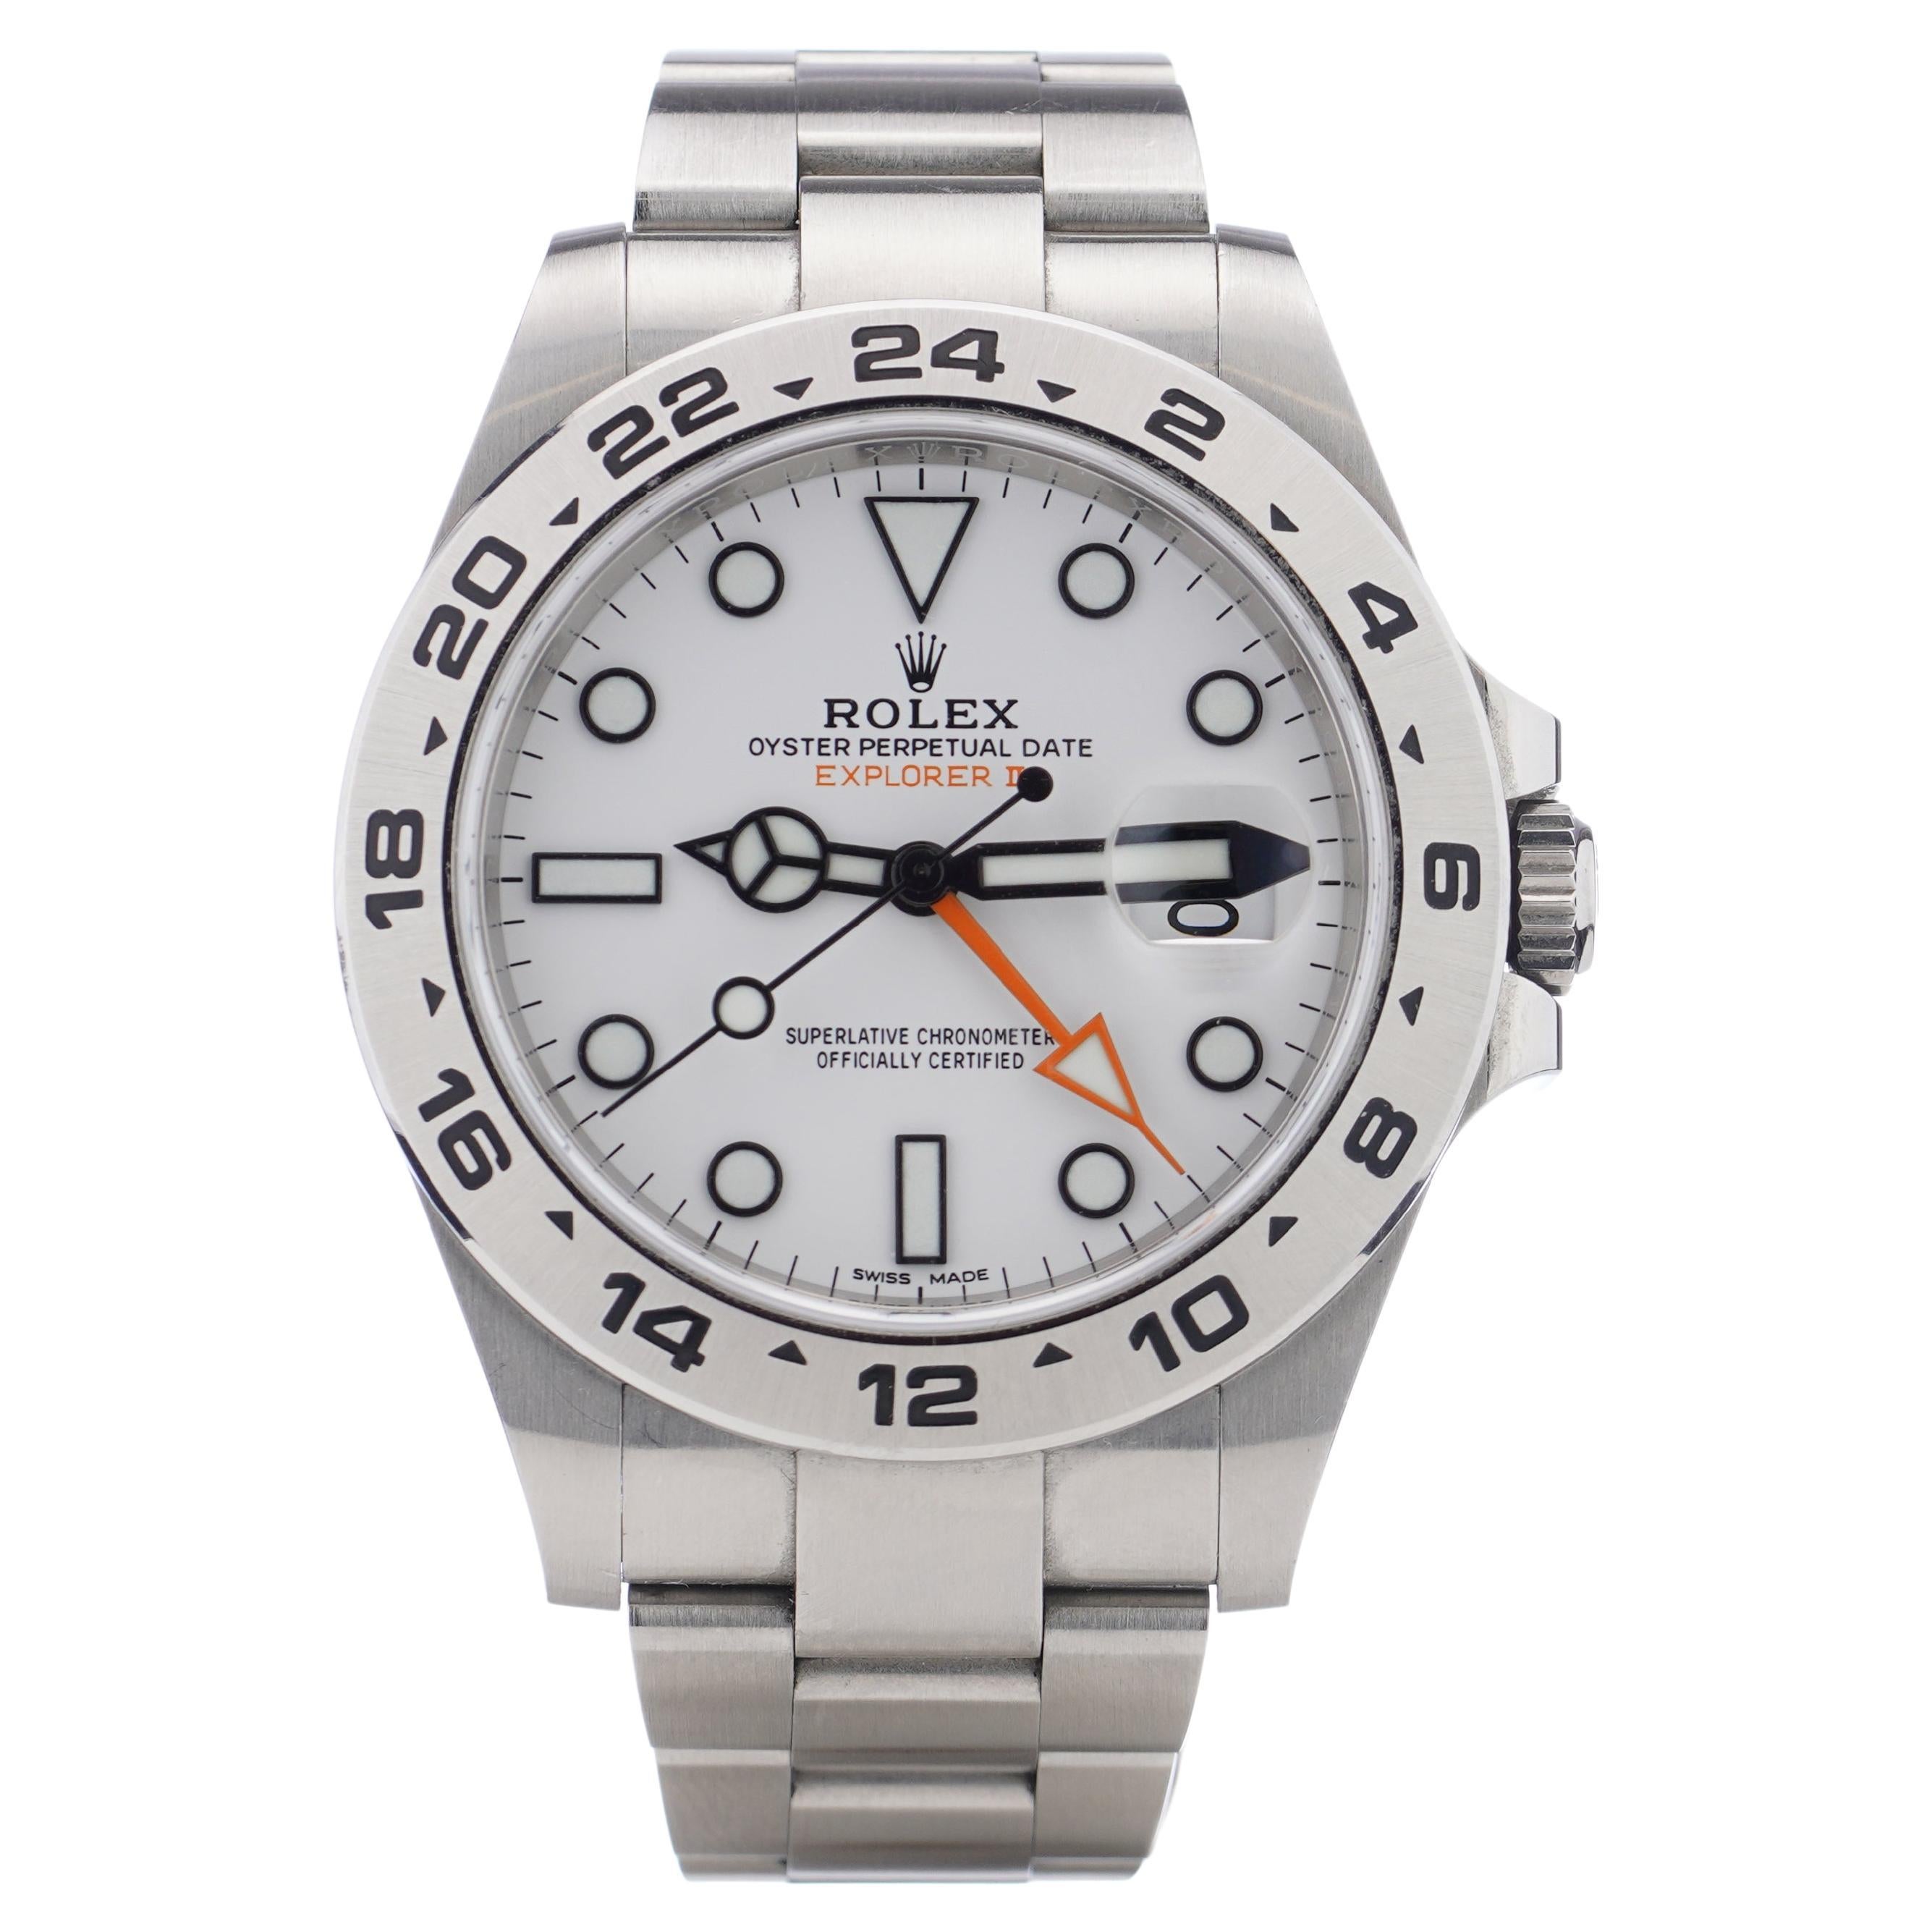 Rolex Oyster Perpetual Explorer II 216570 For Sale